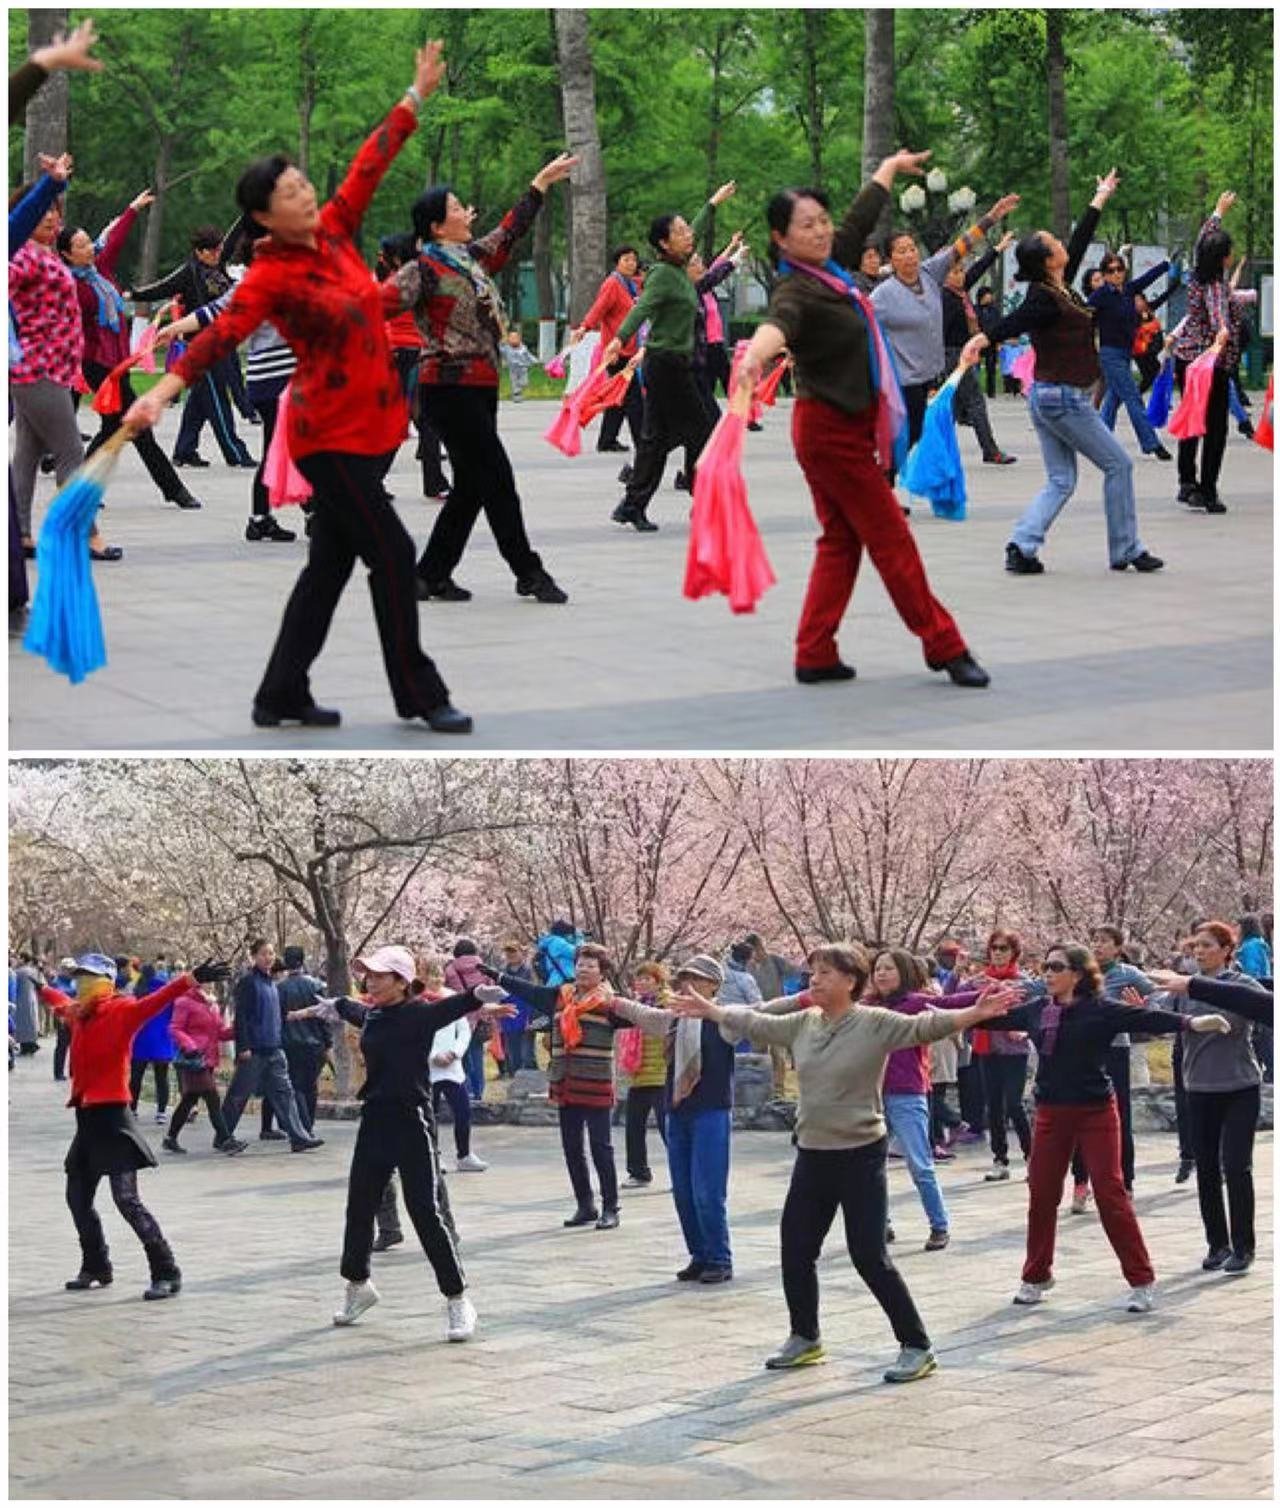 Laodai's favourite China-related fact: The fact that many people in China enjoy dancing in the street.